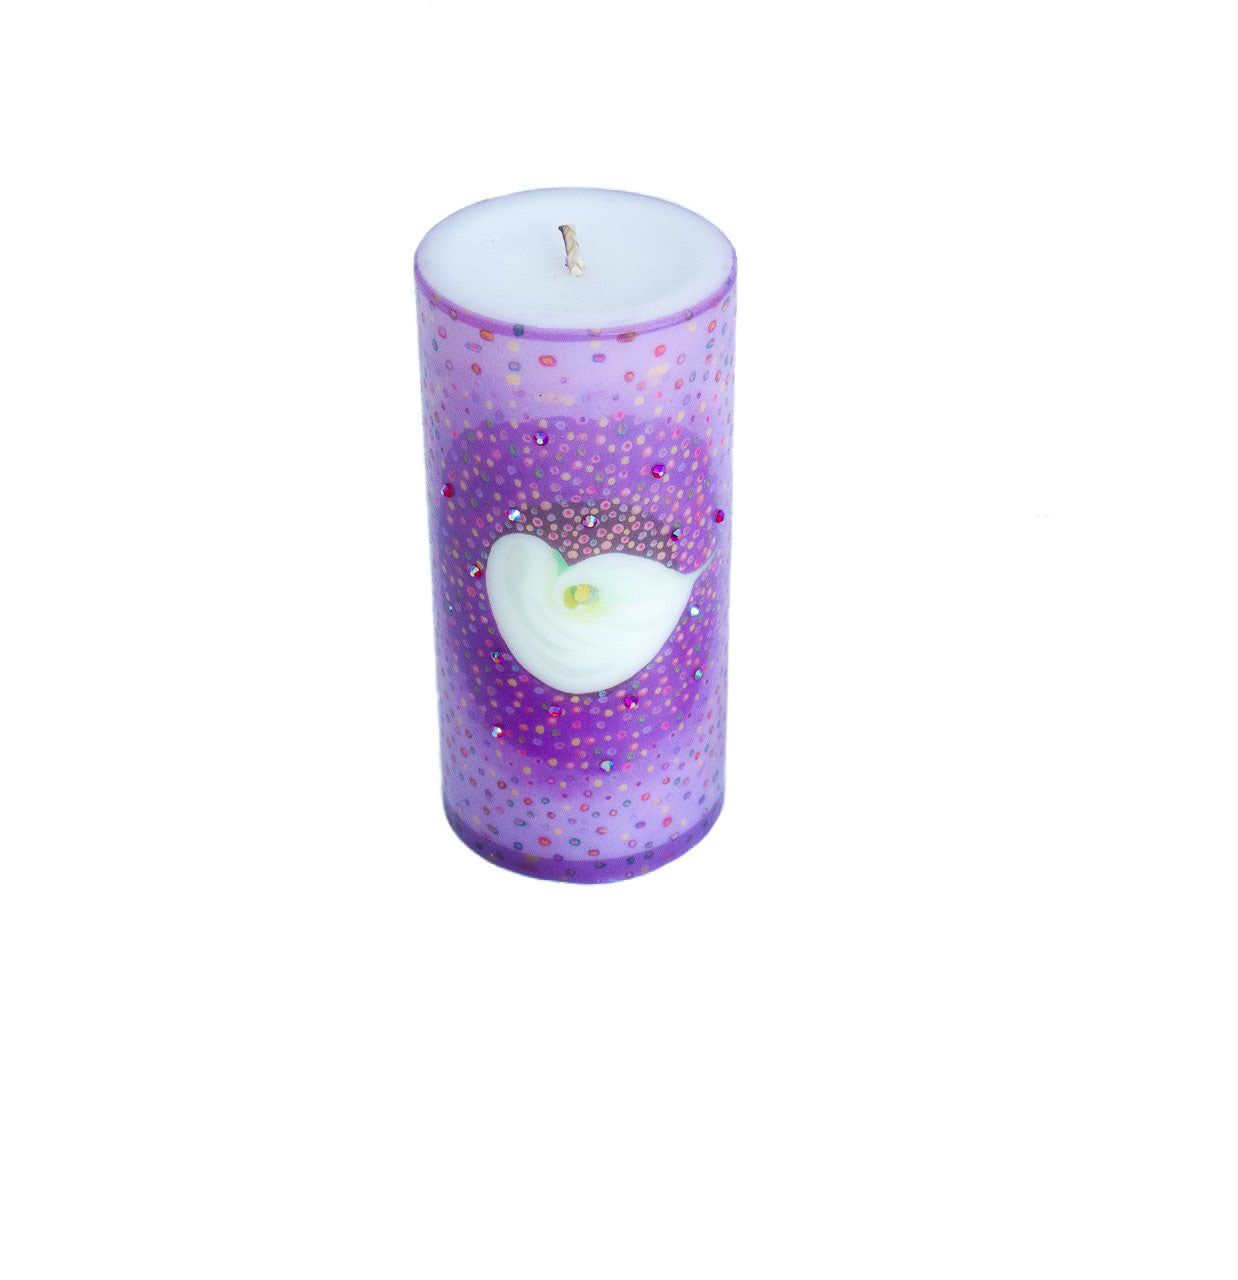 Swarovski Crystals Pillar Candle FLOAT Calla Lily Flower Unscented